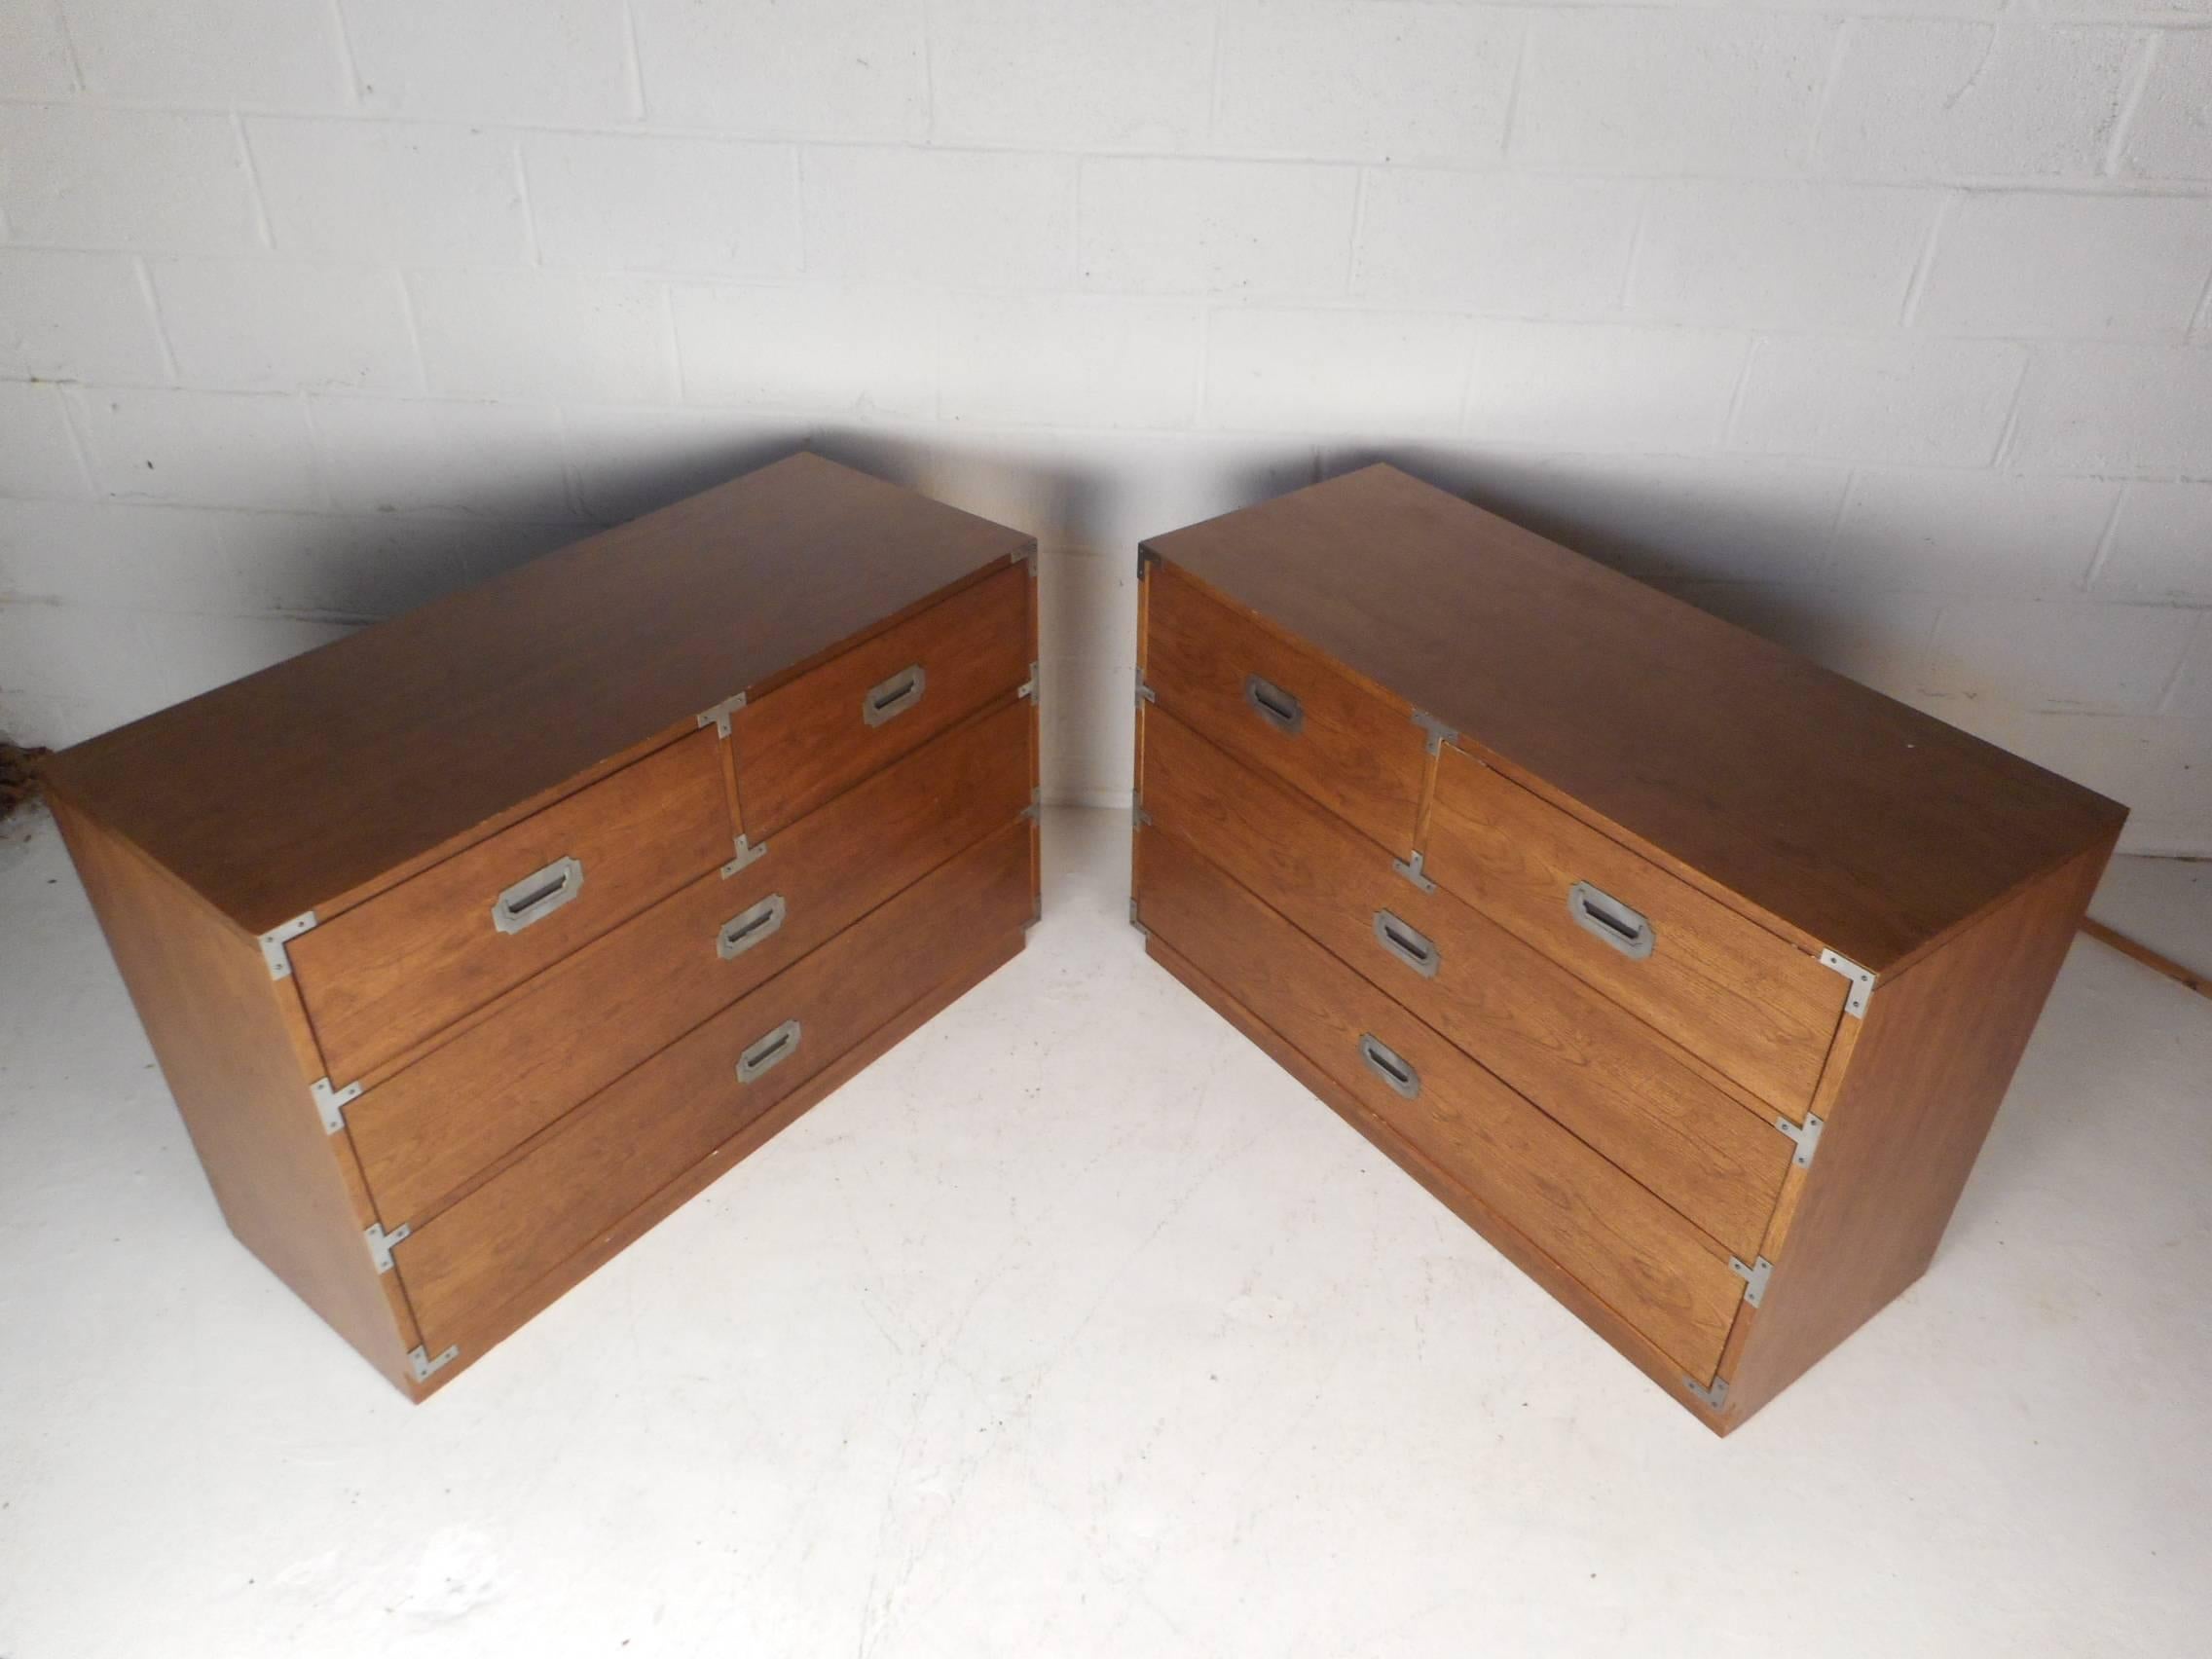 This amazing pair of midcentury style campaign chests feature four drawers on each with unique metal pulls. These well made chests offer plenty of room for storage within a compact design. This stylish pair have beautiful wood grain and additional